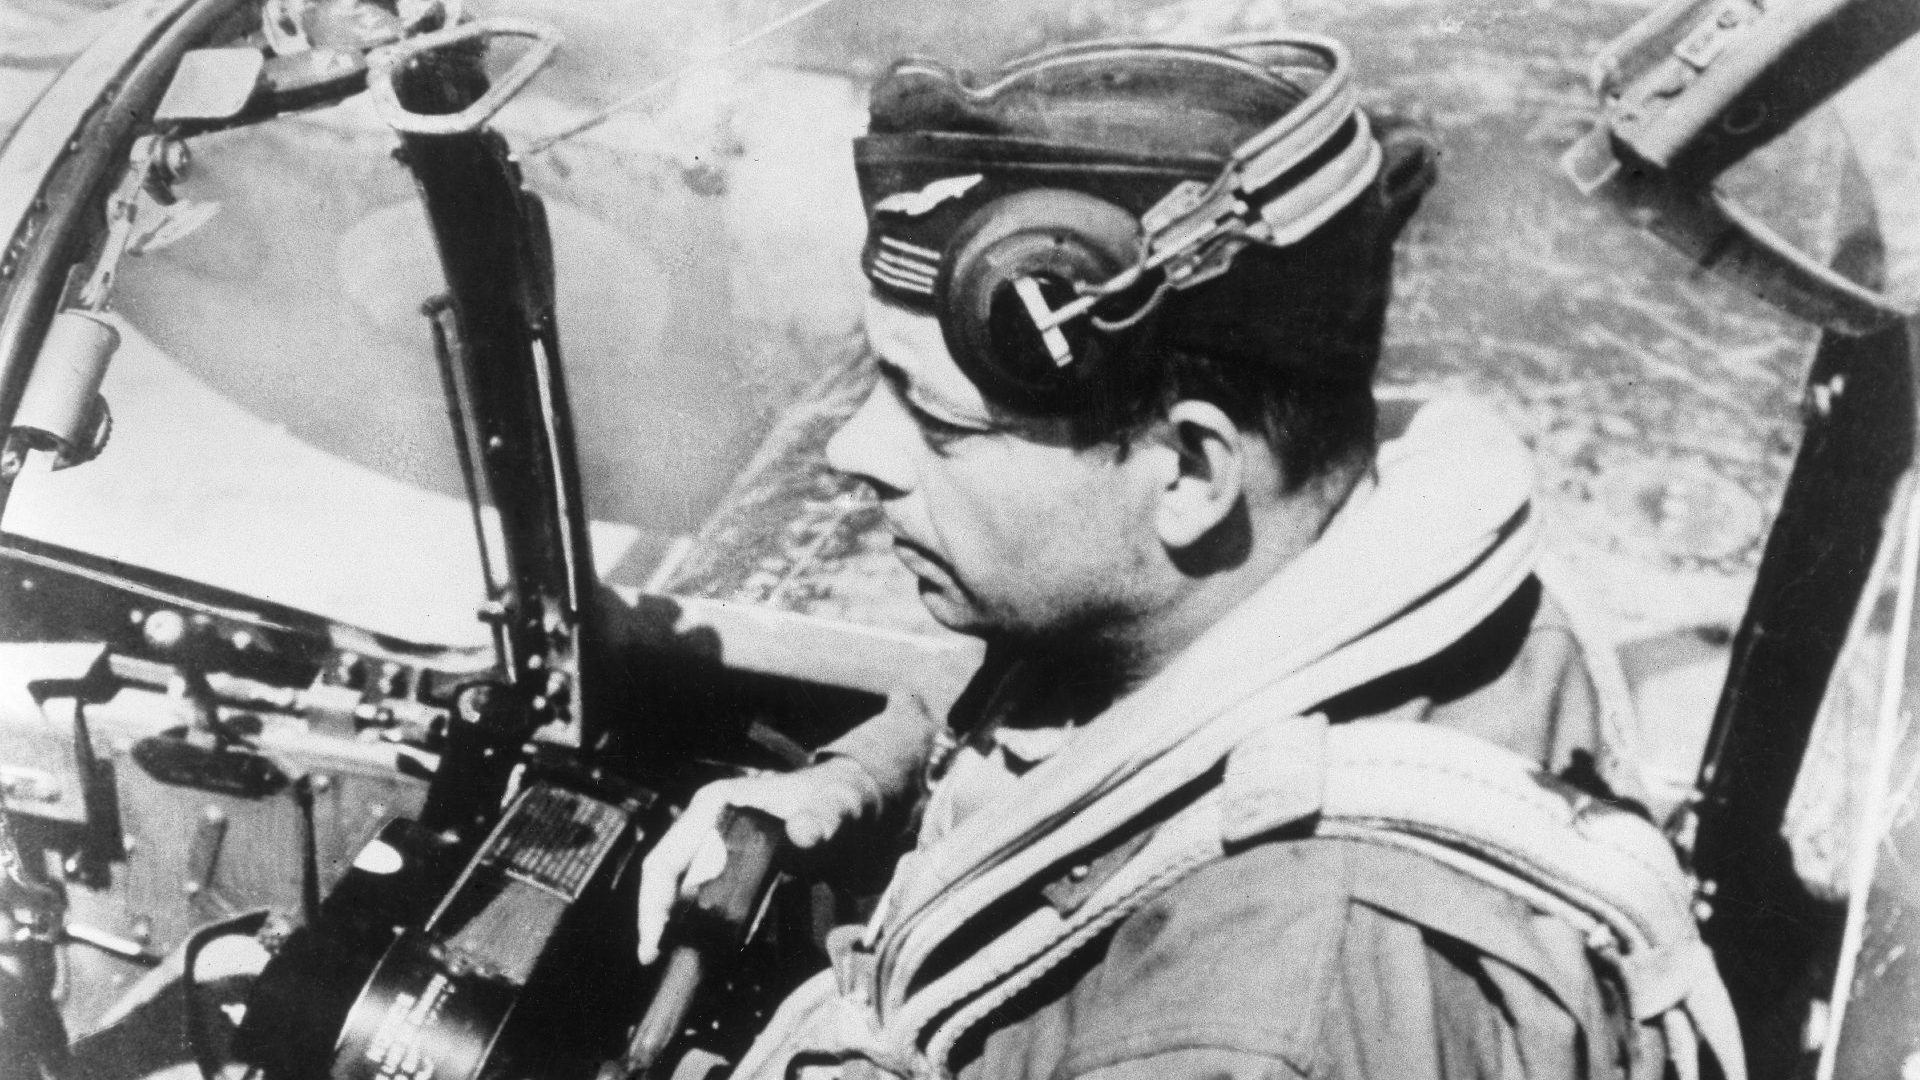 French writer, poet, journalist and aviator Antoine de Saint-Exupéry flying over Sicily in May 1944. Photo: ullstein bild/Getty